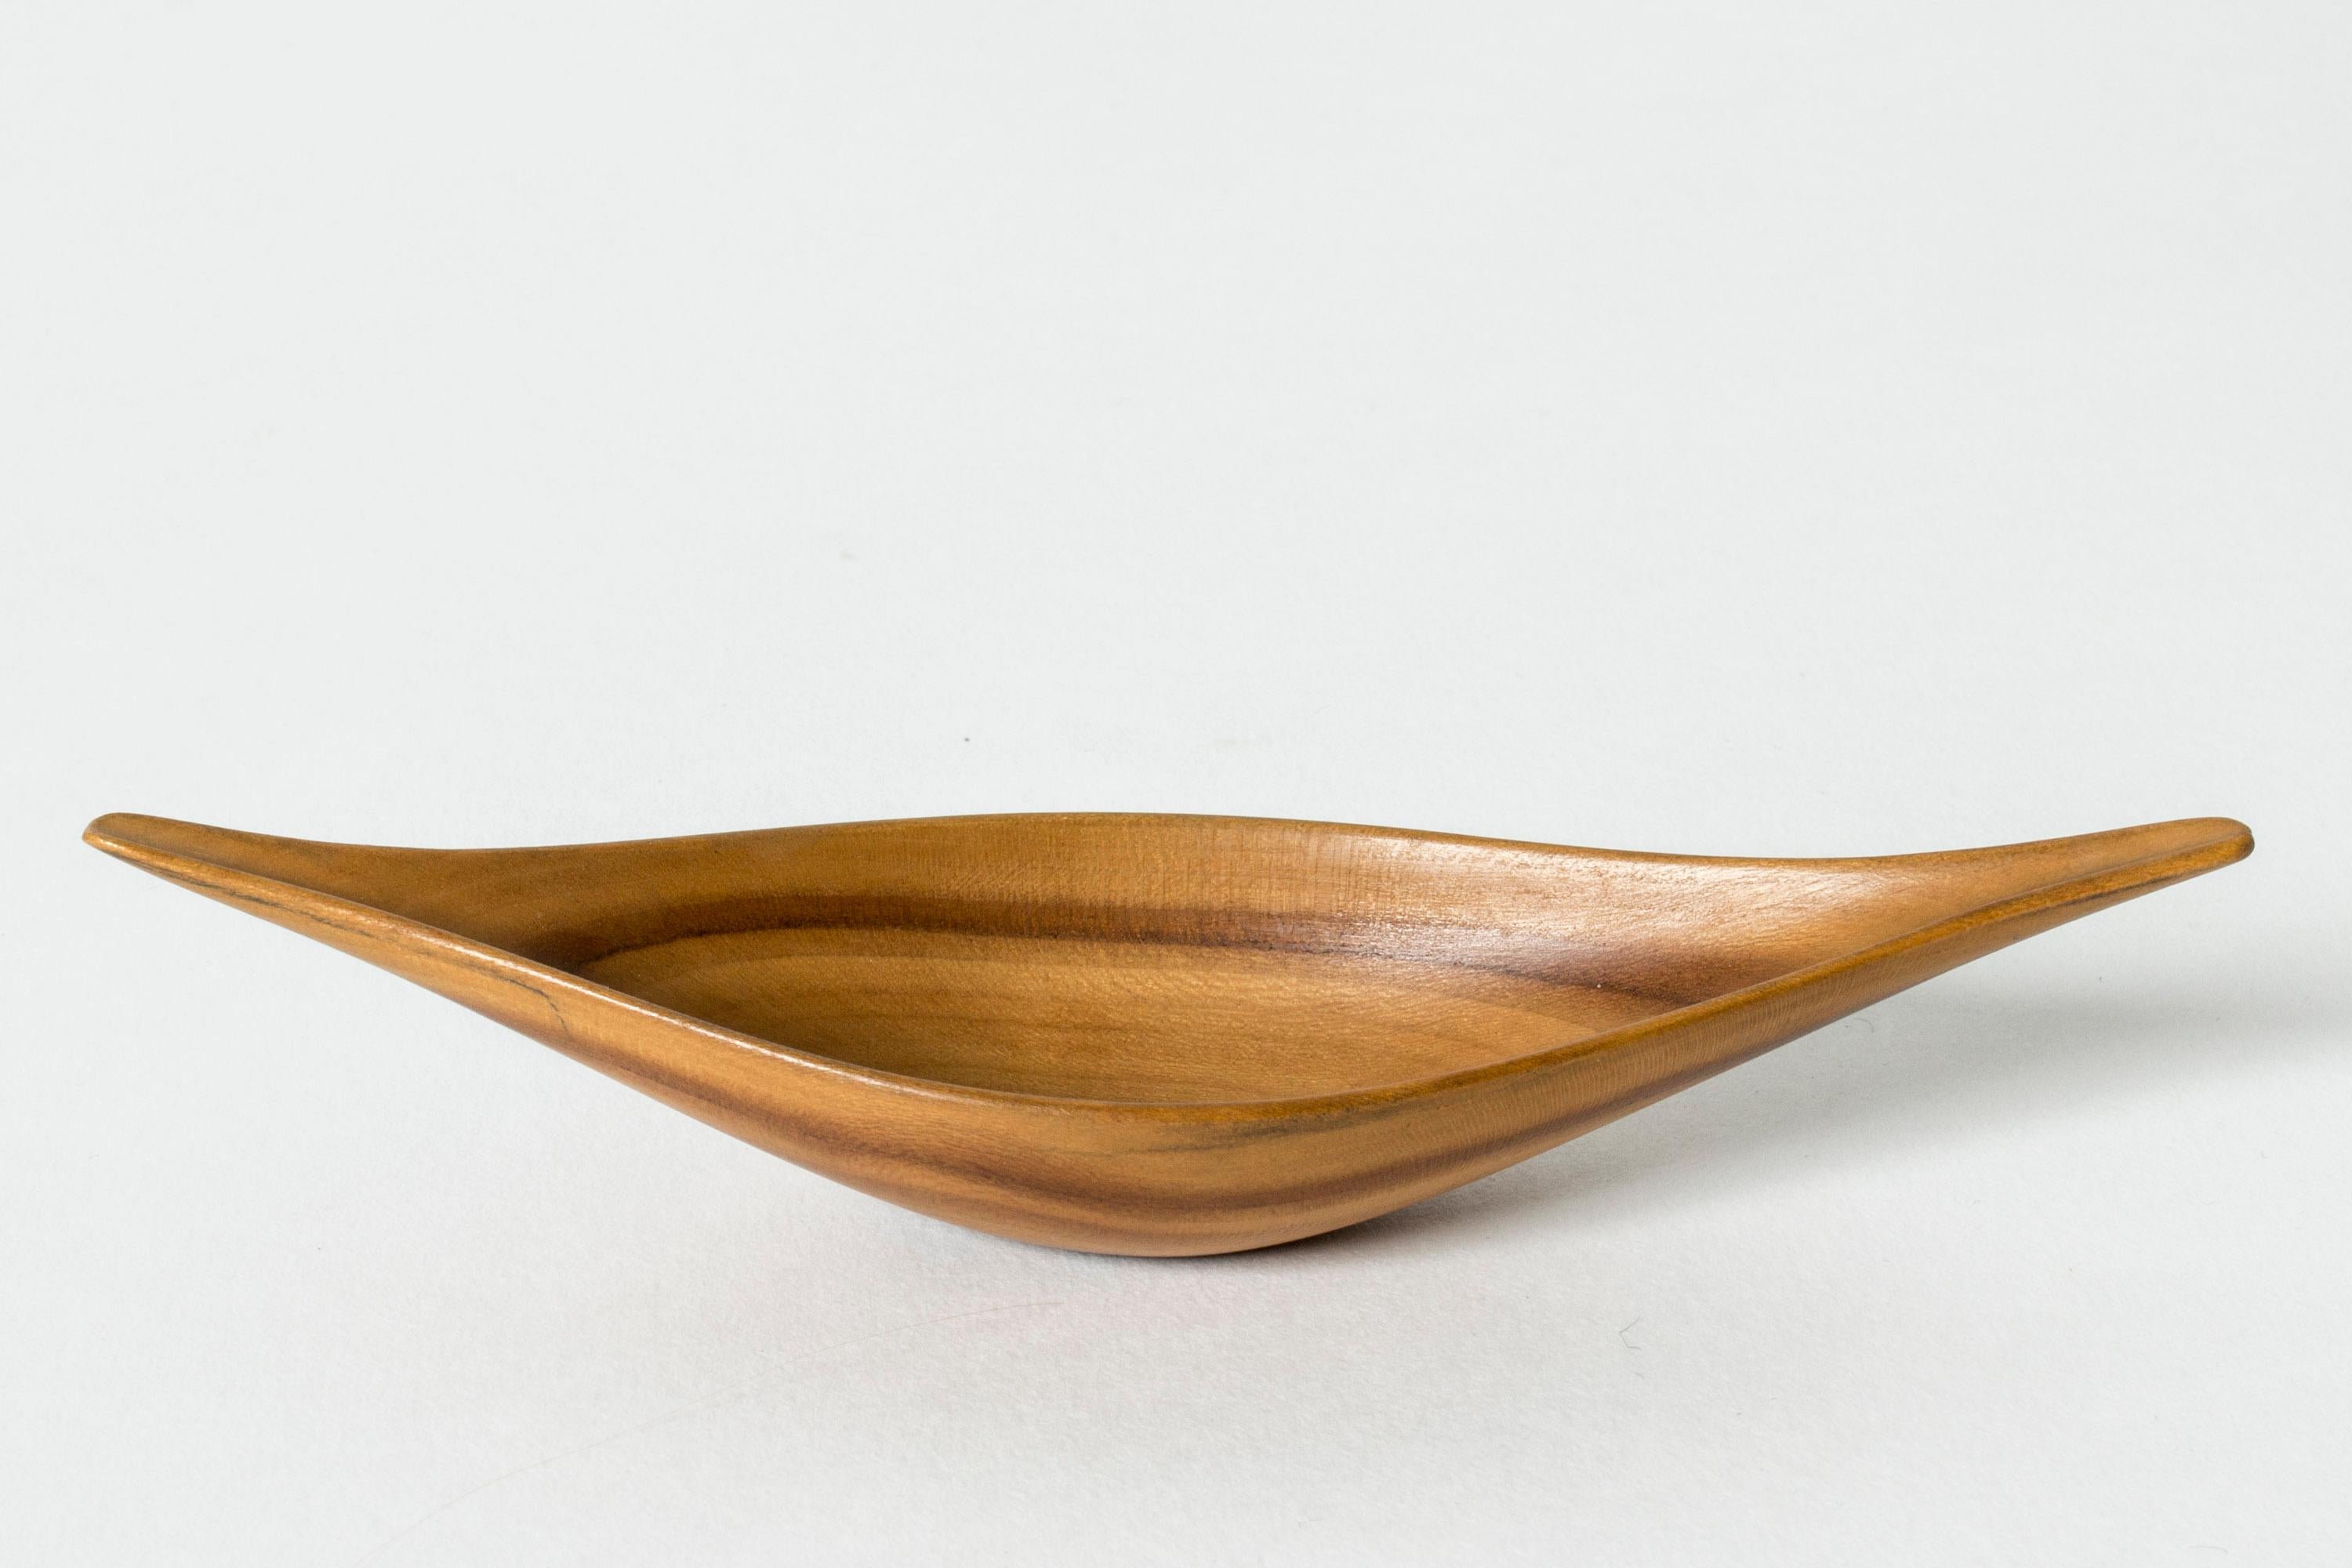 Lovely small bowl by Johnny Mattsson, sculpted from fruitwood with different nuances. Long form, tapering edges.